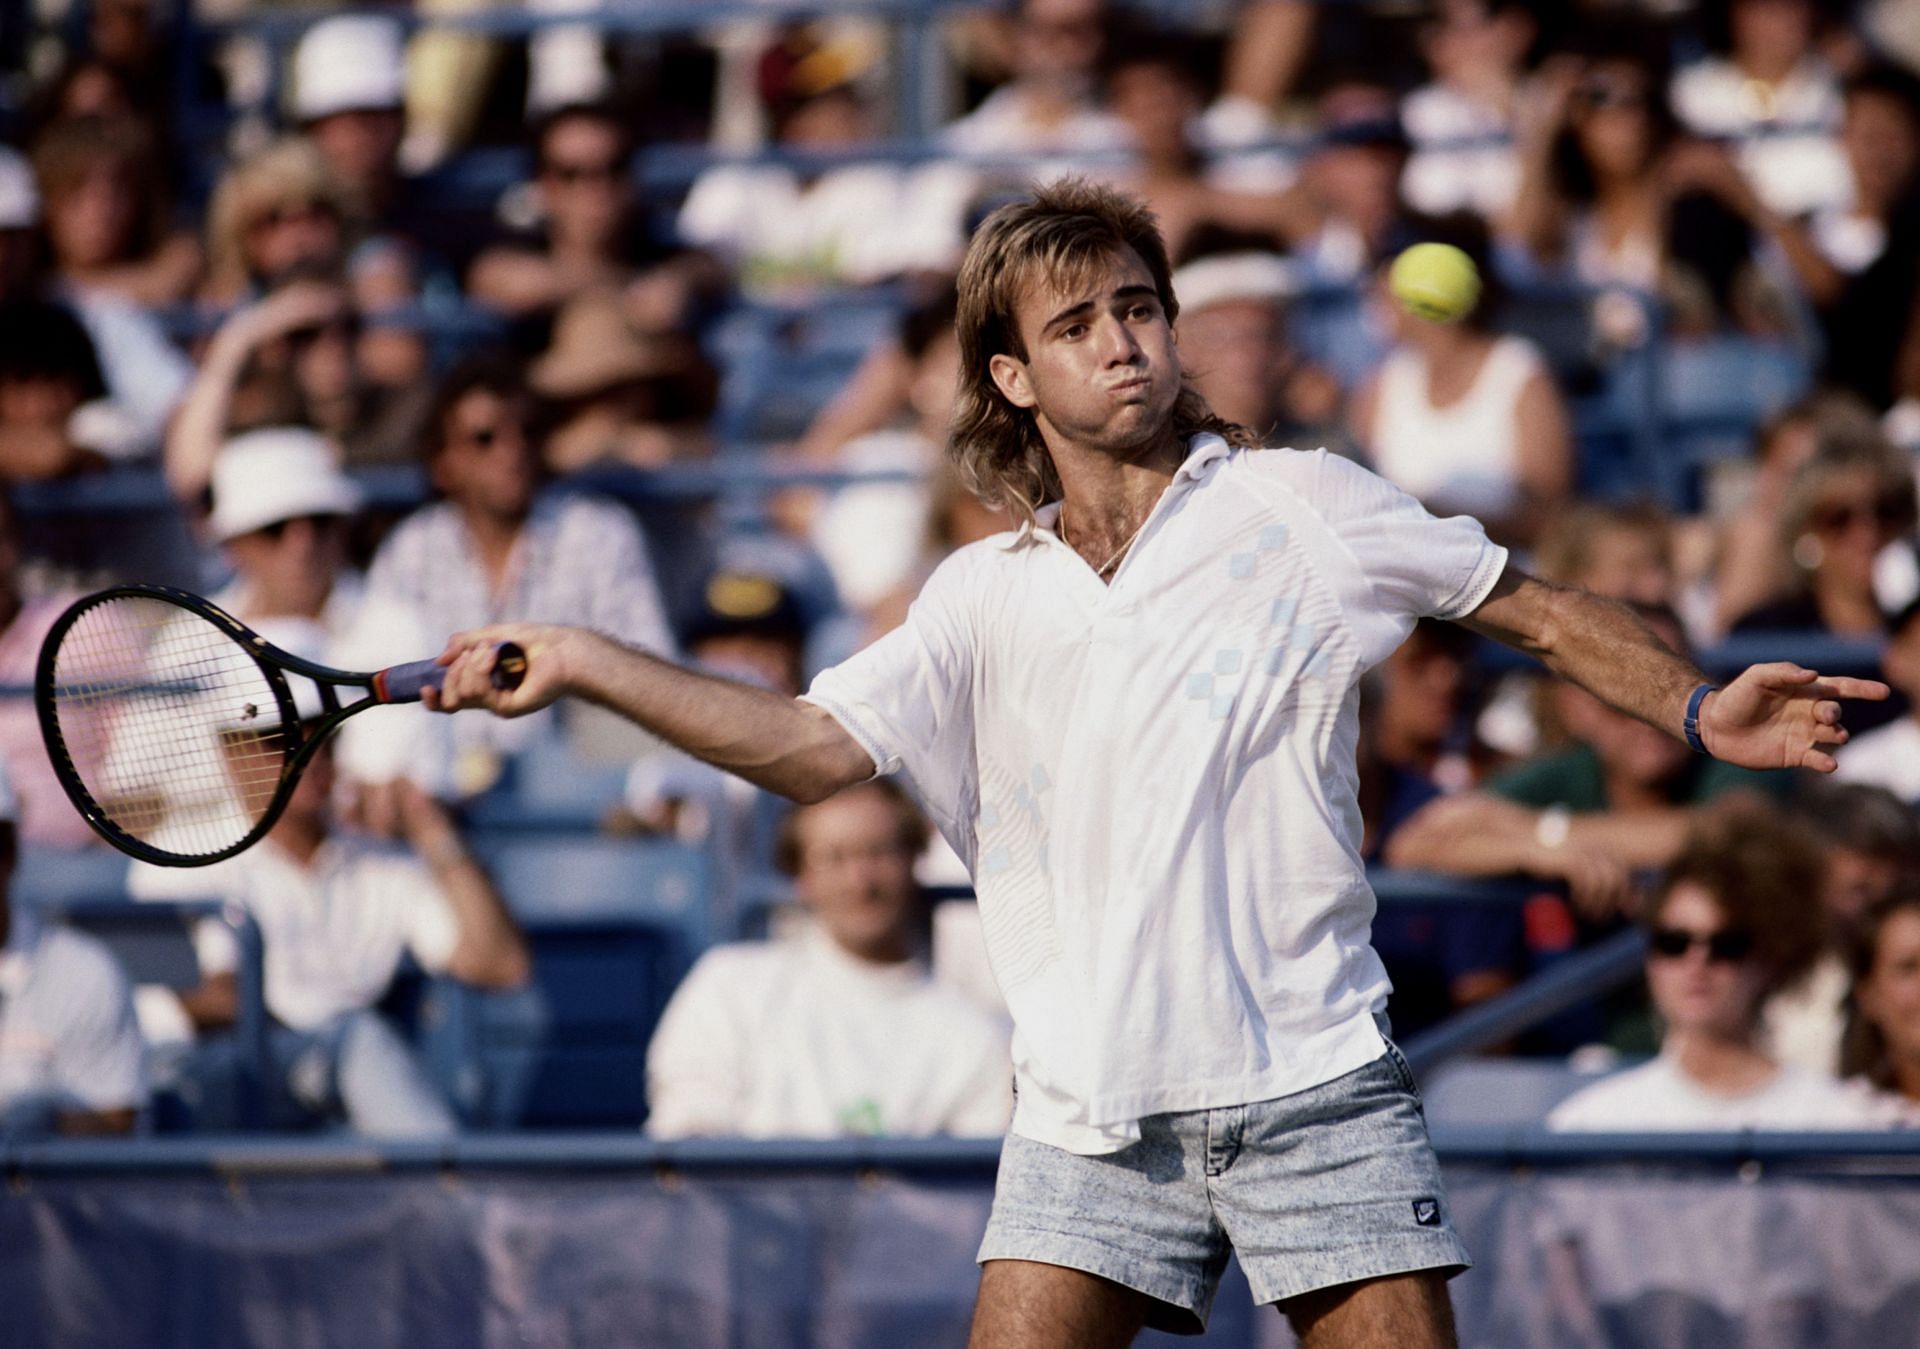 Andre Agassi attempts a forehand